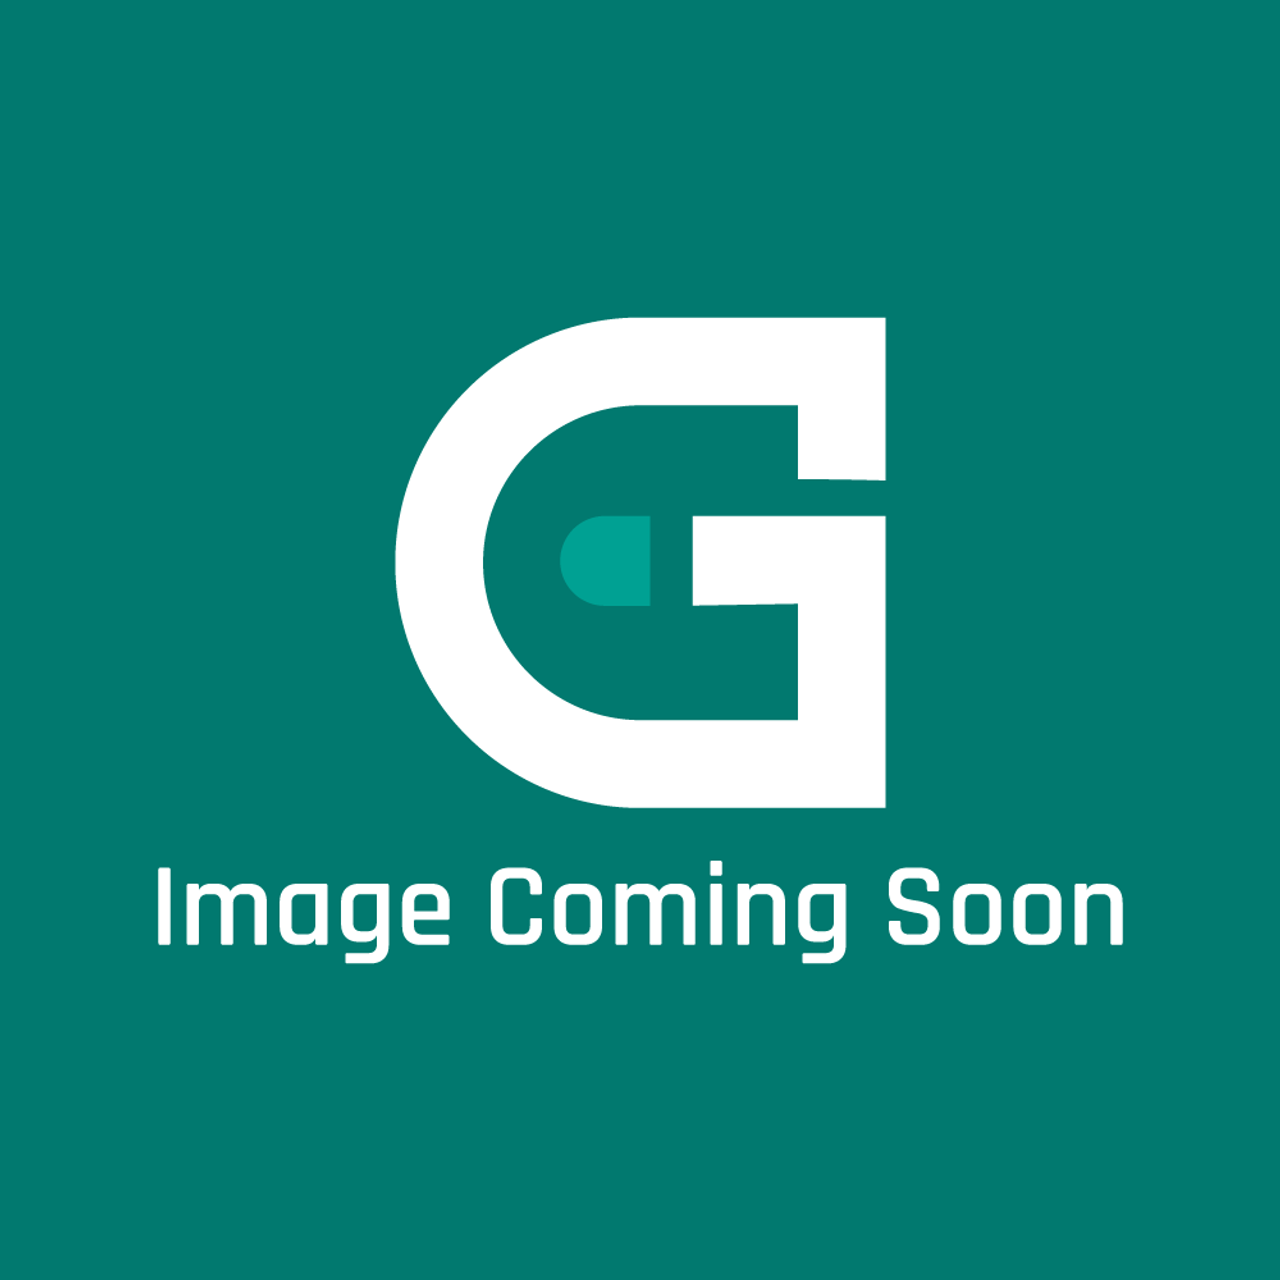 Frigidaire - Electrolux 5304495517 Grate - Image Coming Soon!